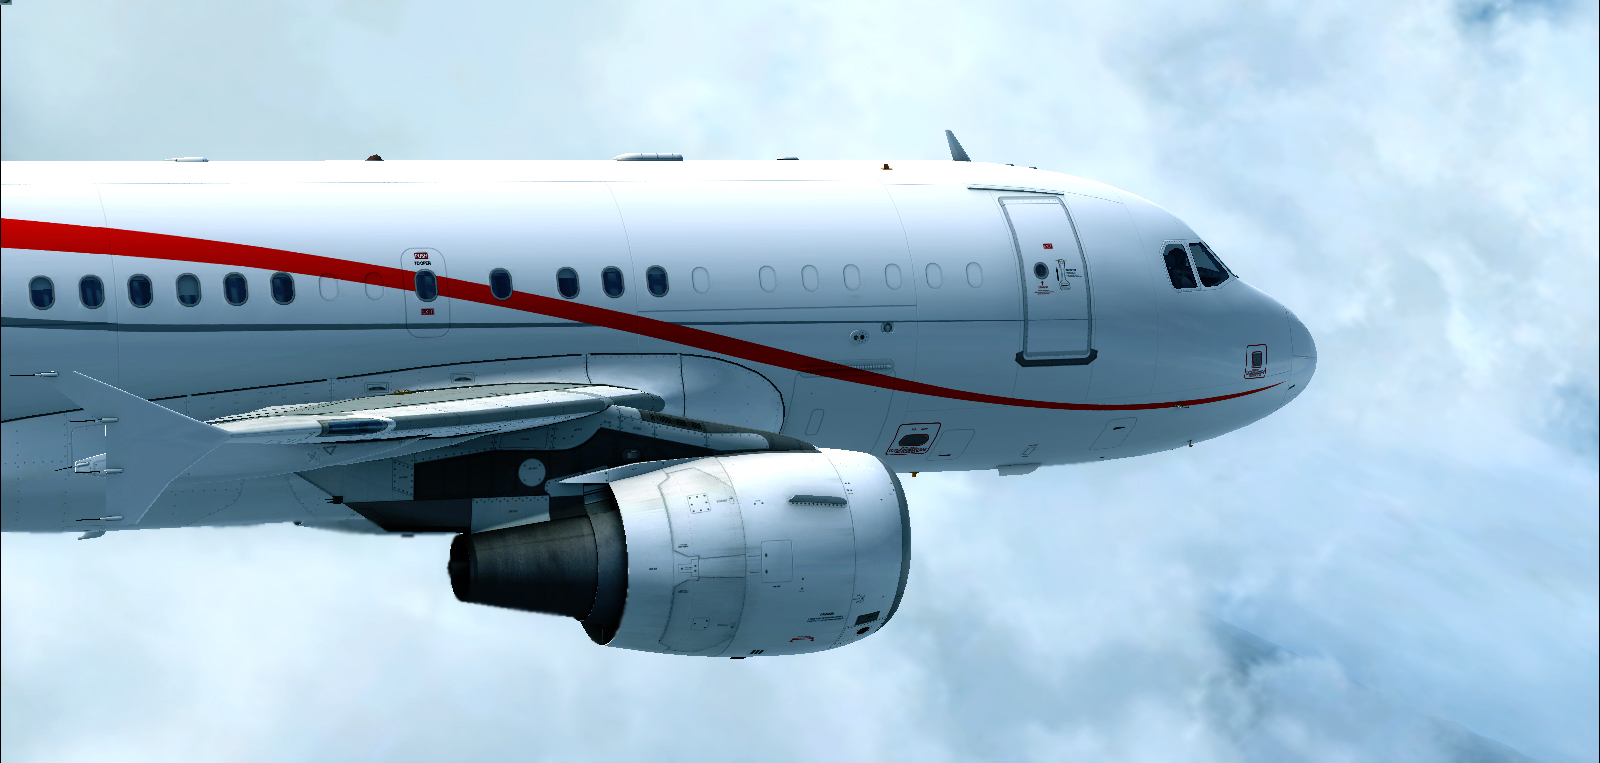 More information about "Airbus A318-112 Elite CJ - Tyrolean Jet Services OE-LUX (HD)"